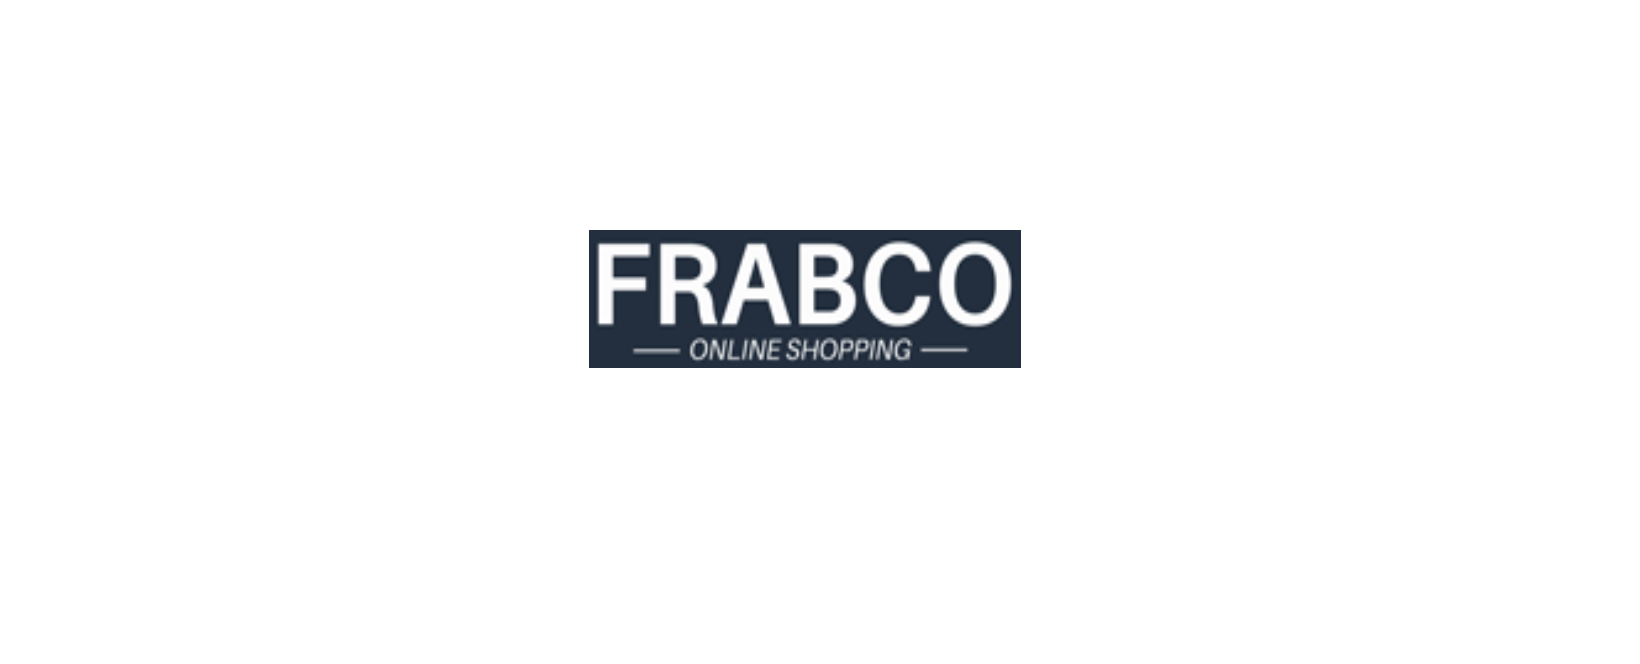 Frabco Discount Code 2022